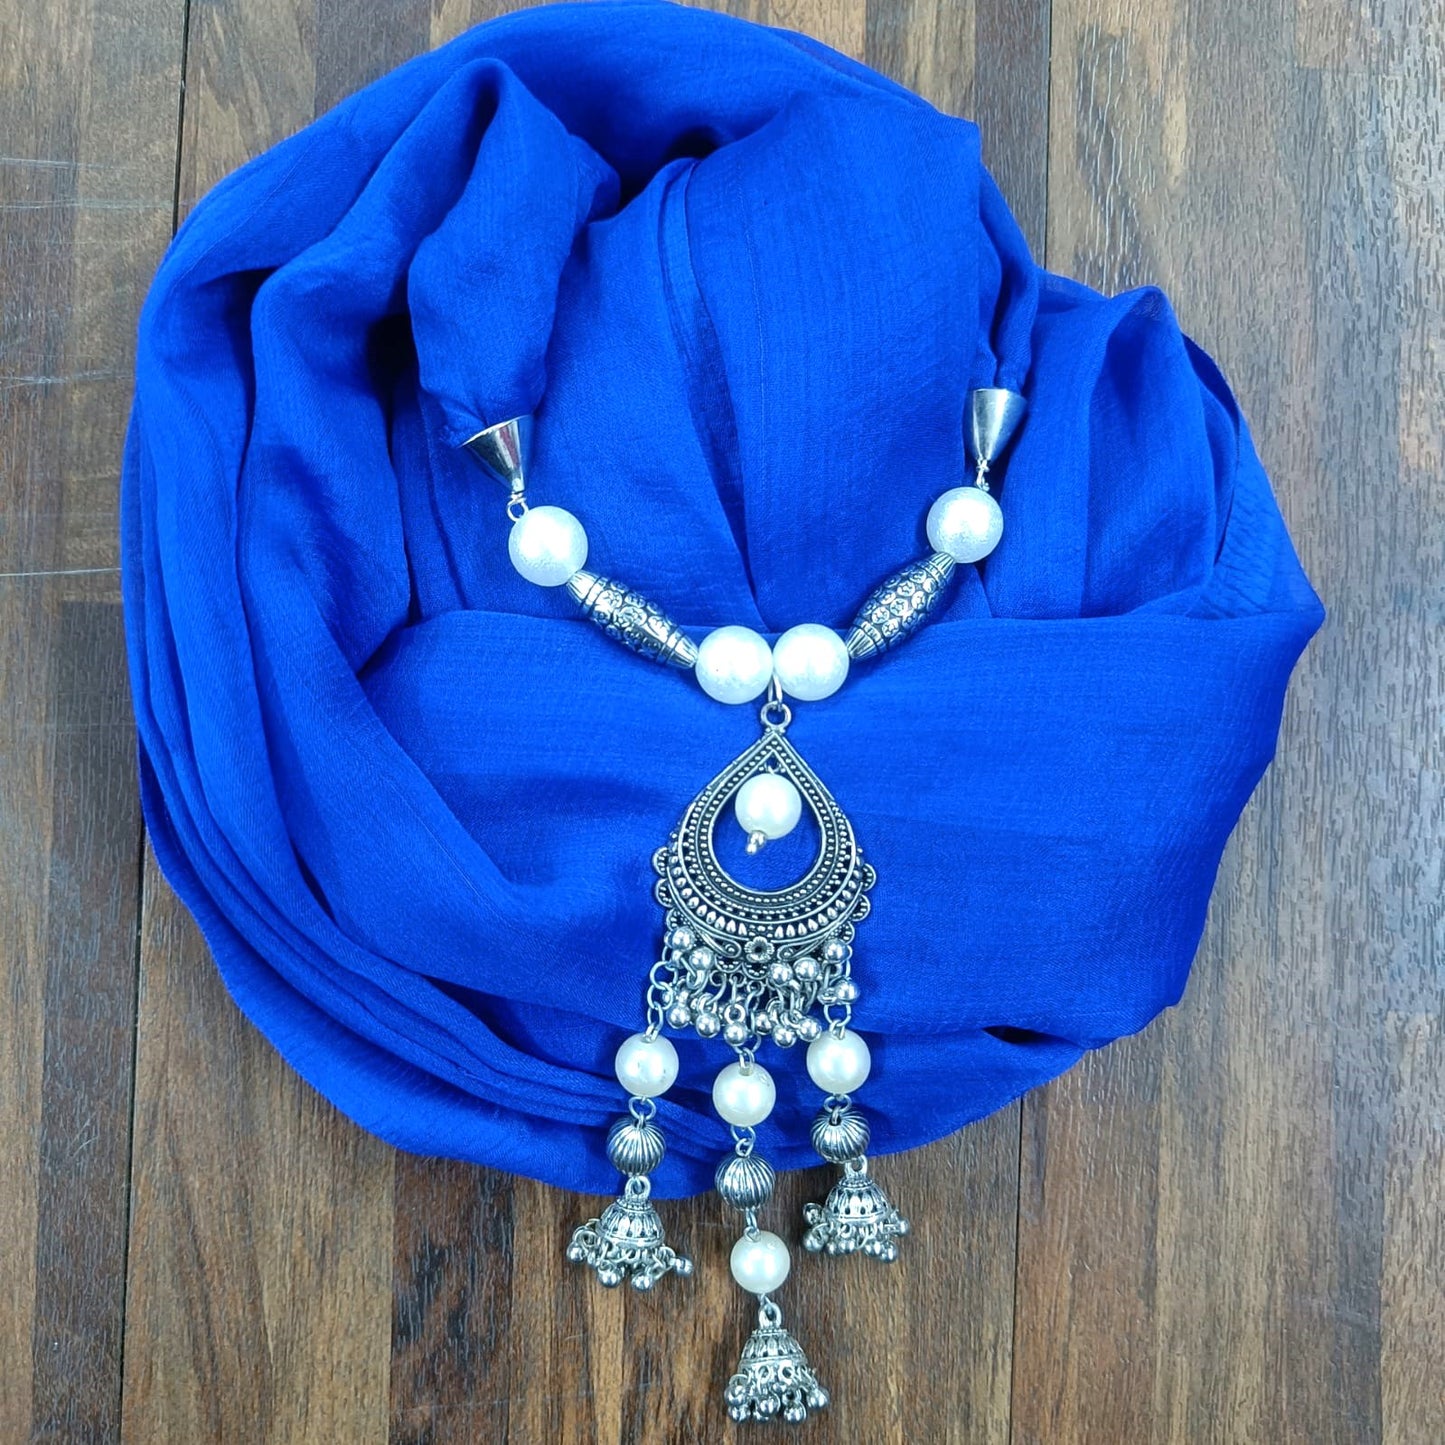 Bdiva Blue Georgette Scarf With Indian Jewelry And Oxidised Motif